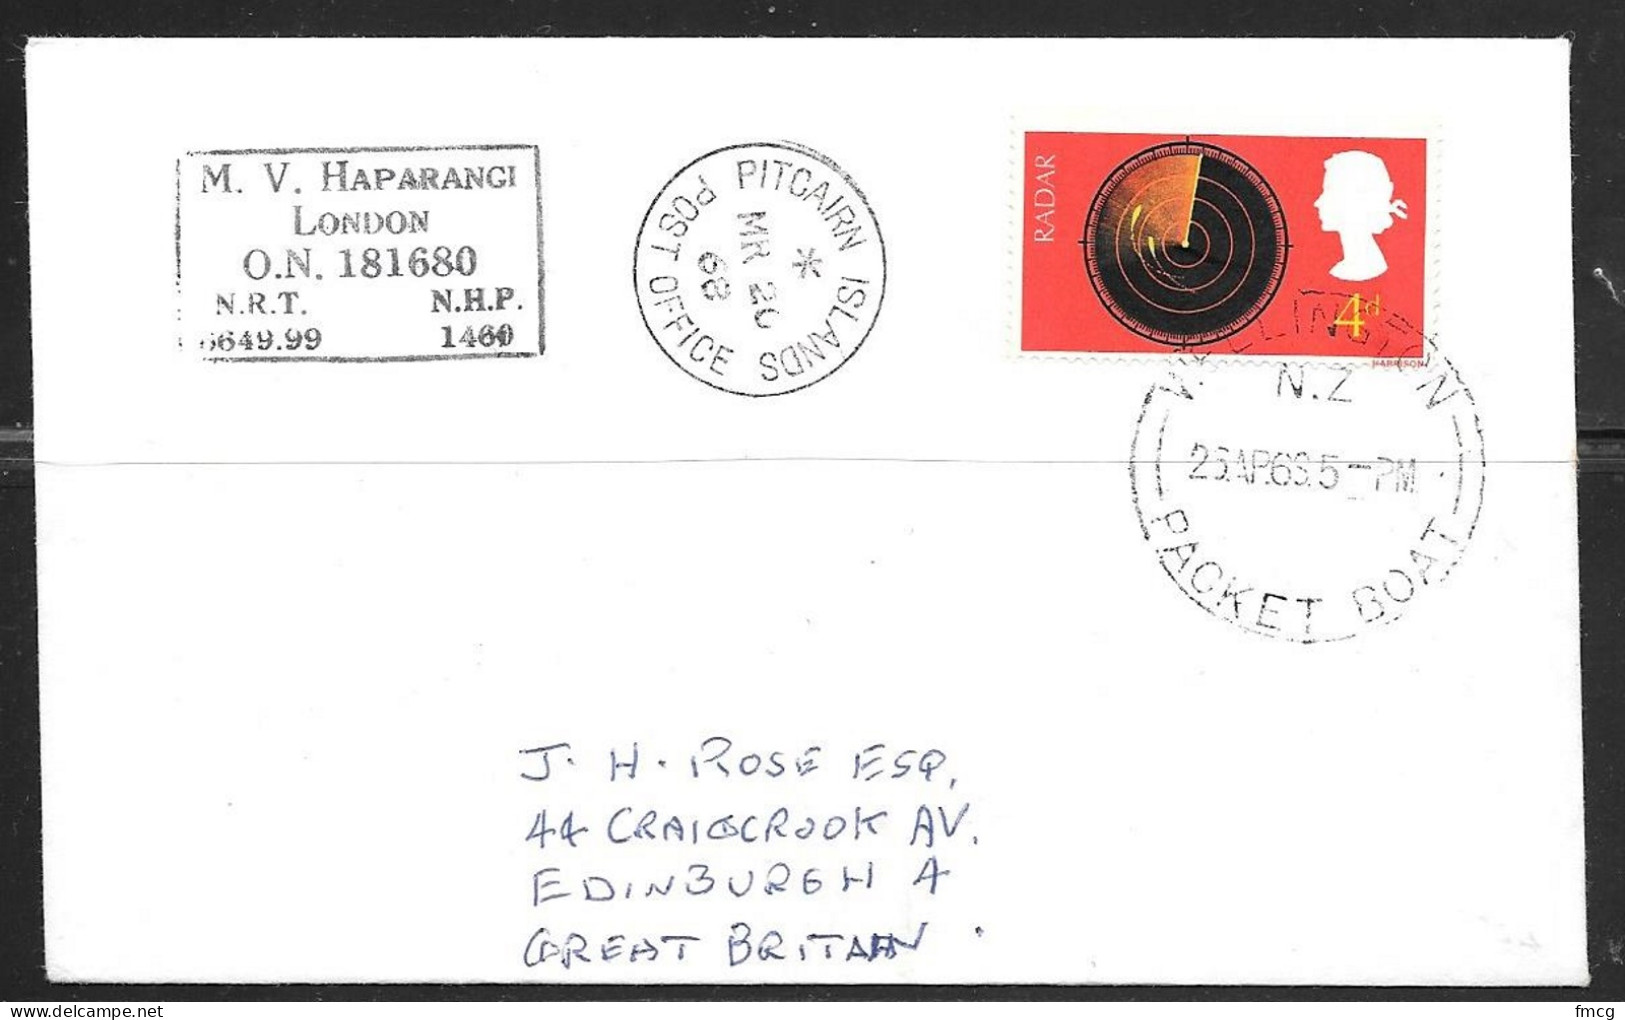 1968 Pitcairn Islands Cancel With Wellington New Zealand Packet Boat Marking - Pitcairninsel